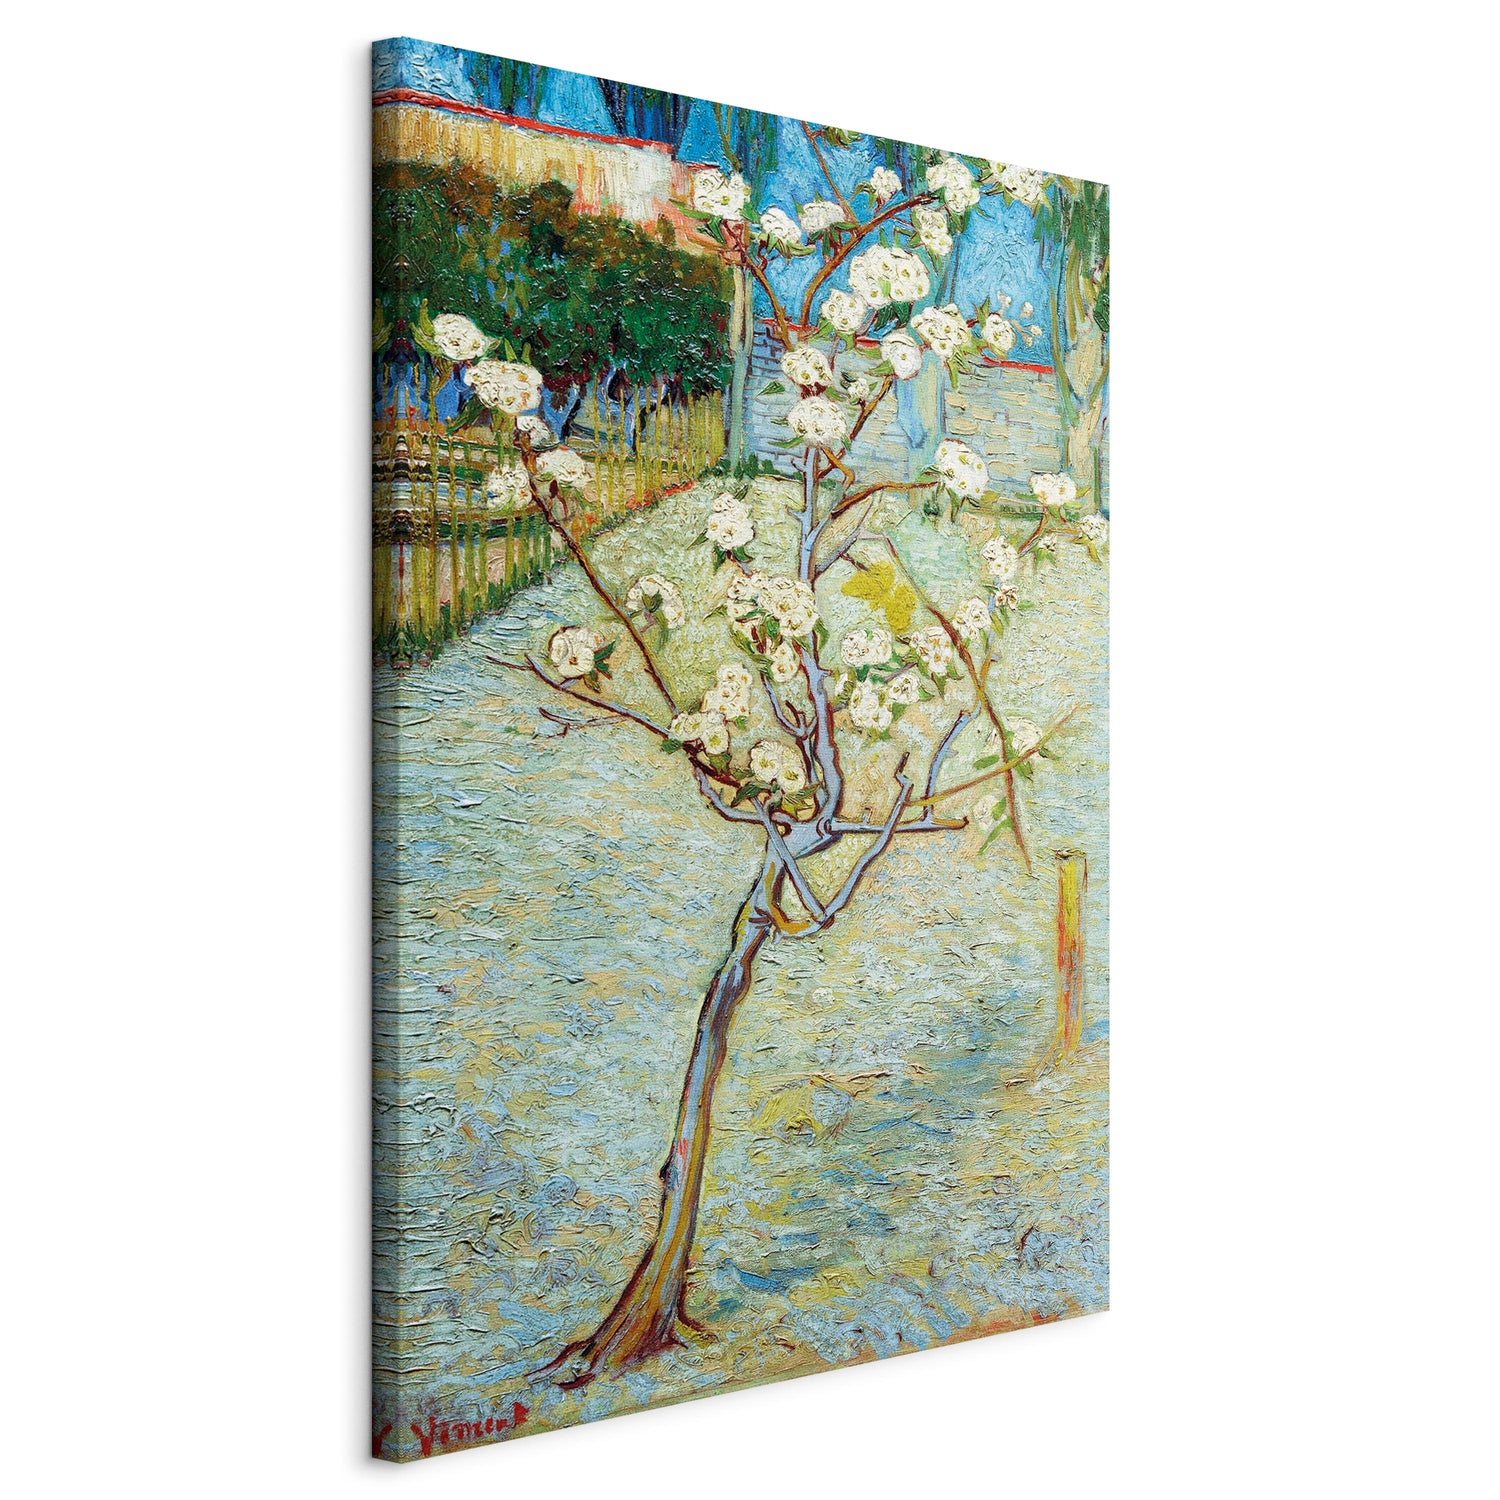 Reproduction Canvas Wall Art - Blossoming Pear Tree